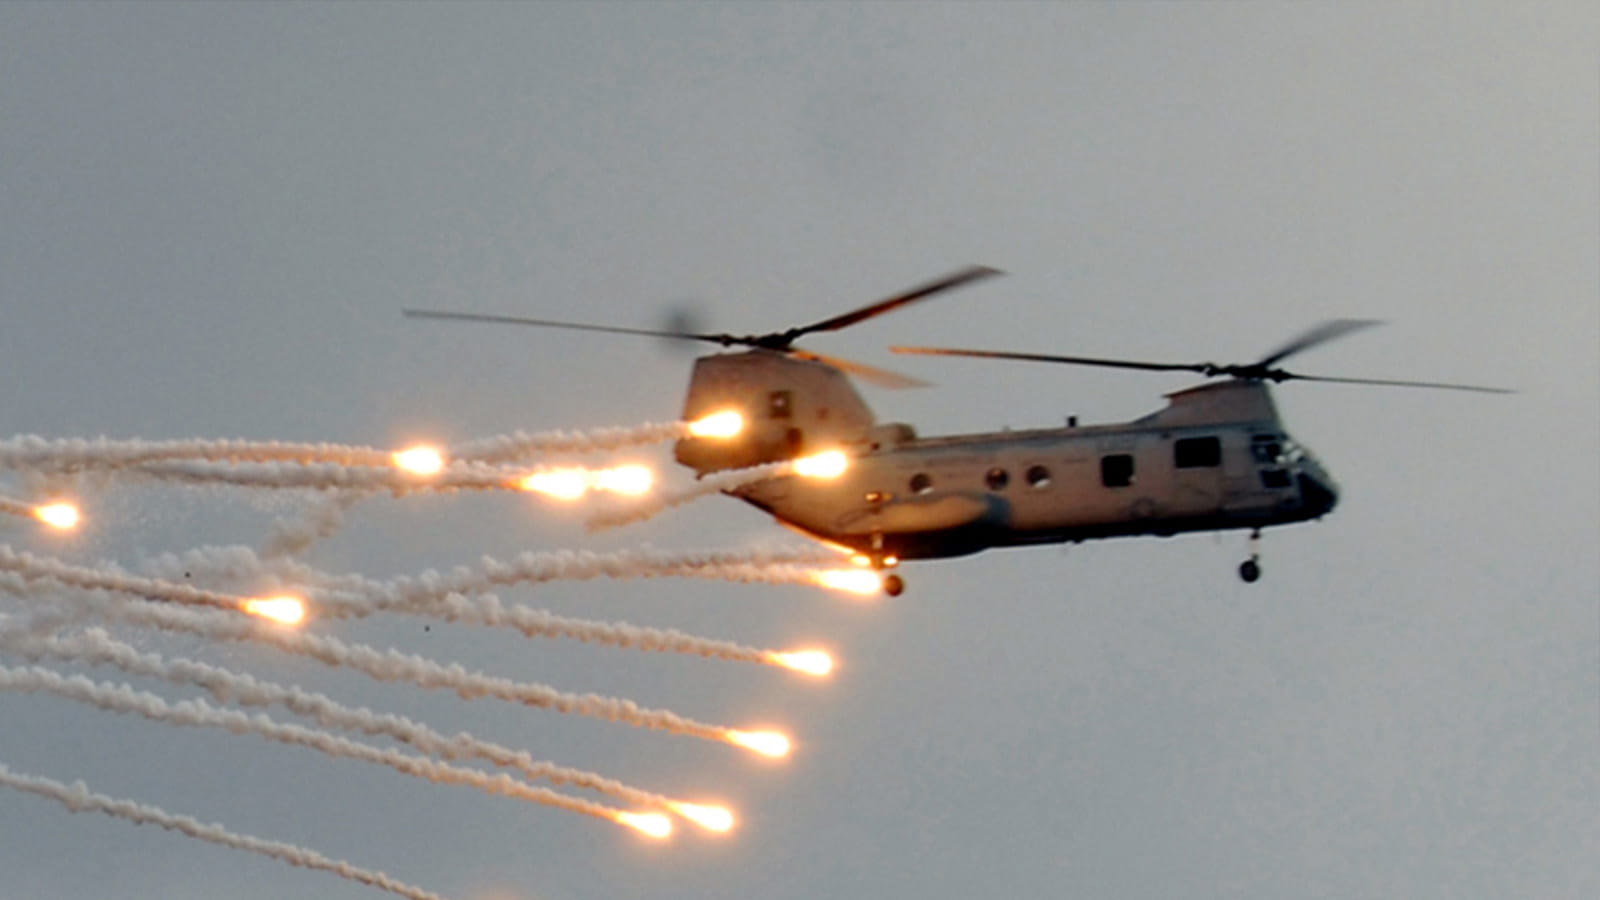 Chinook in flight trailed by flares